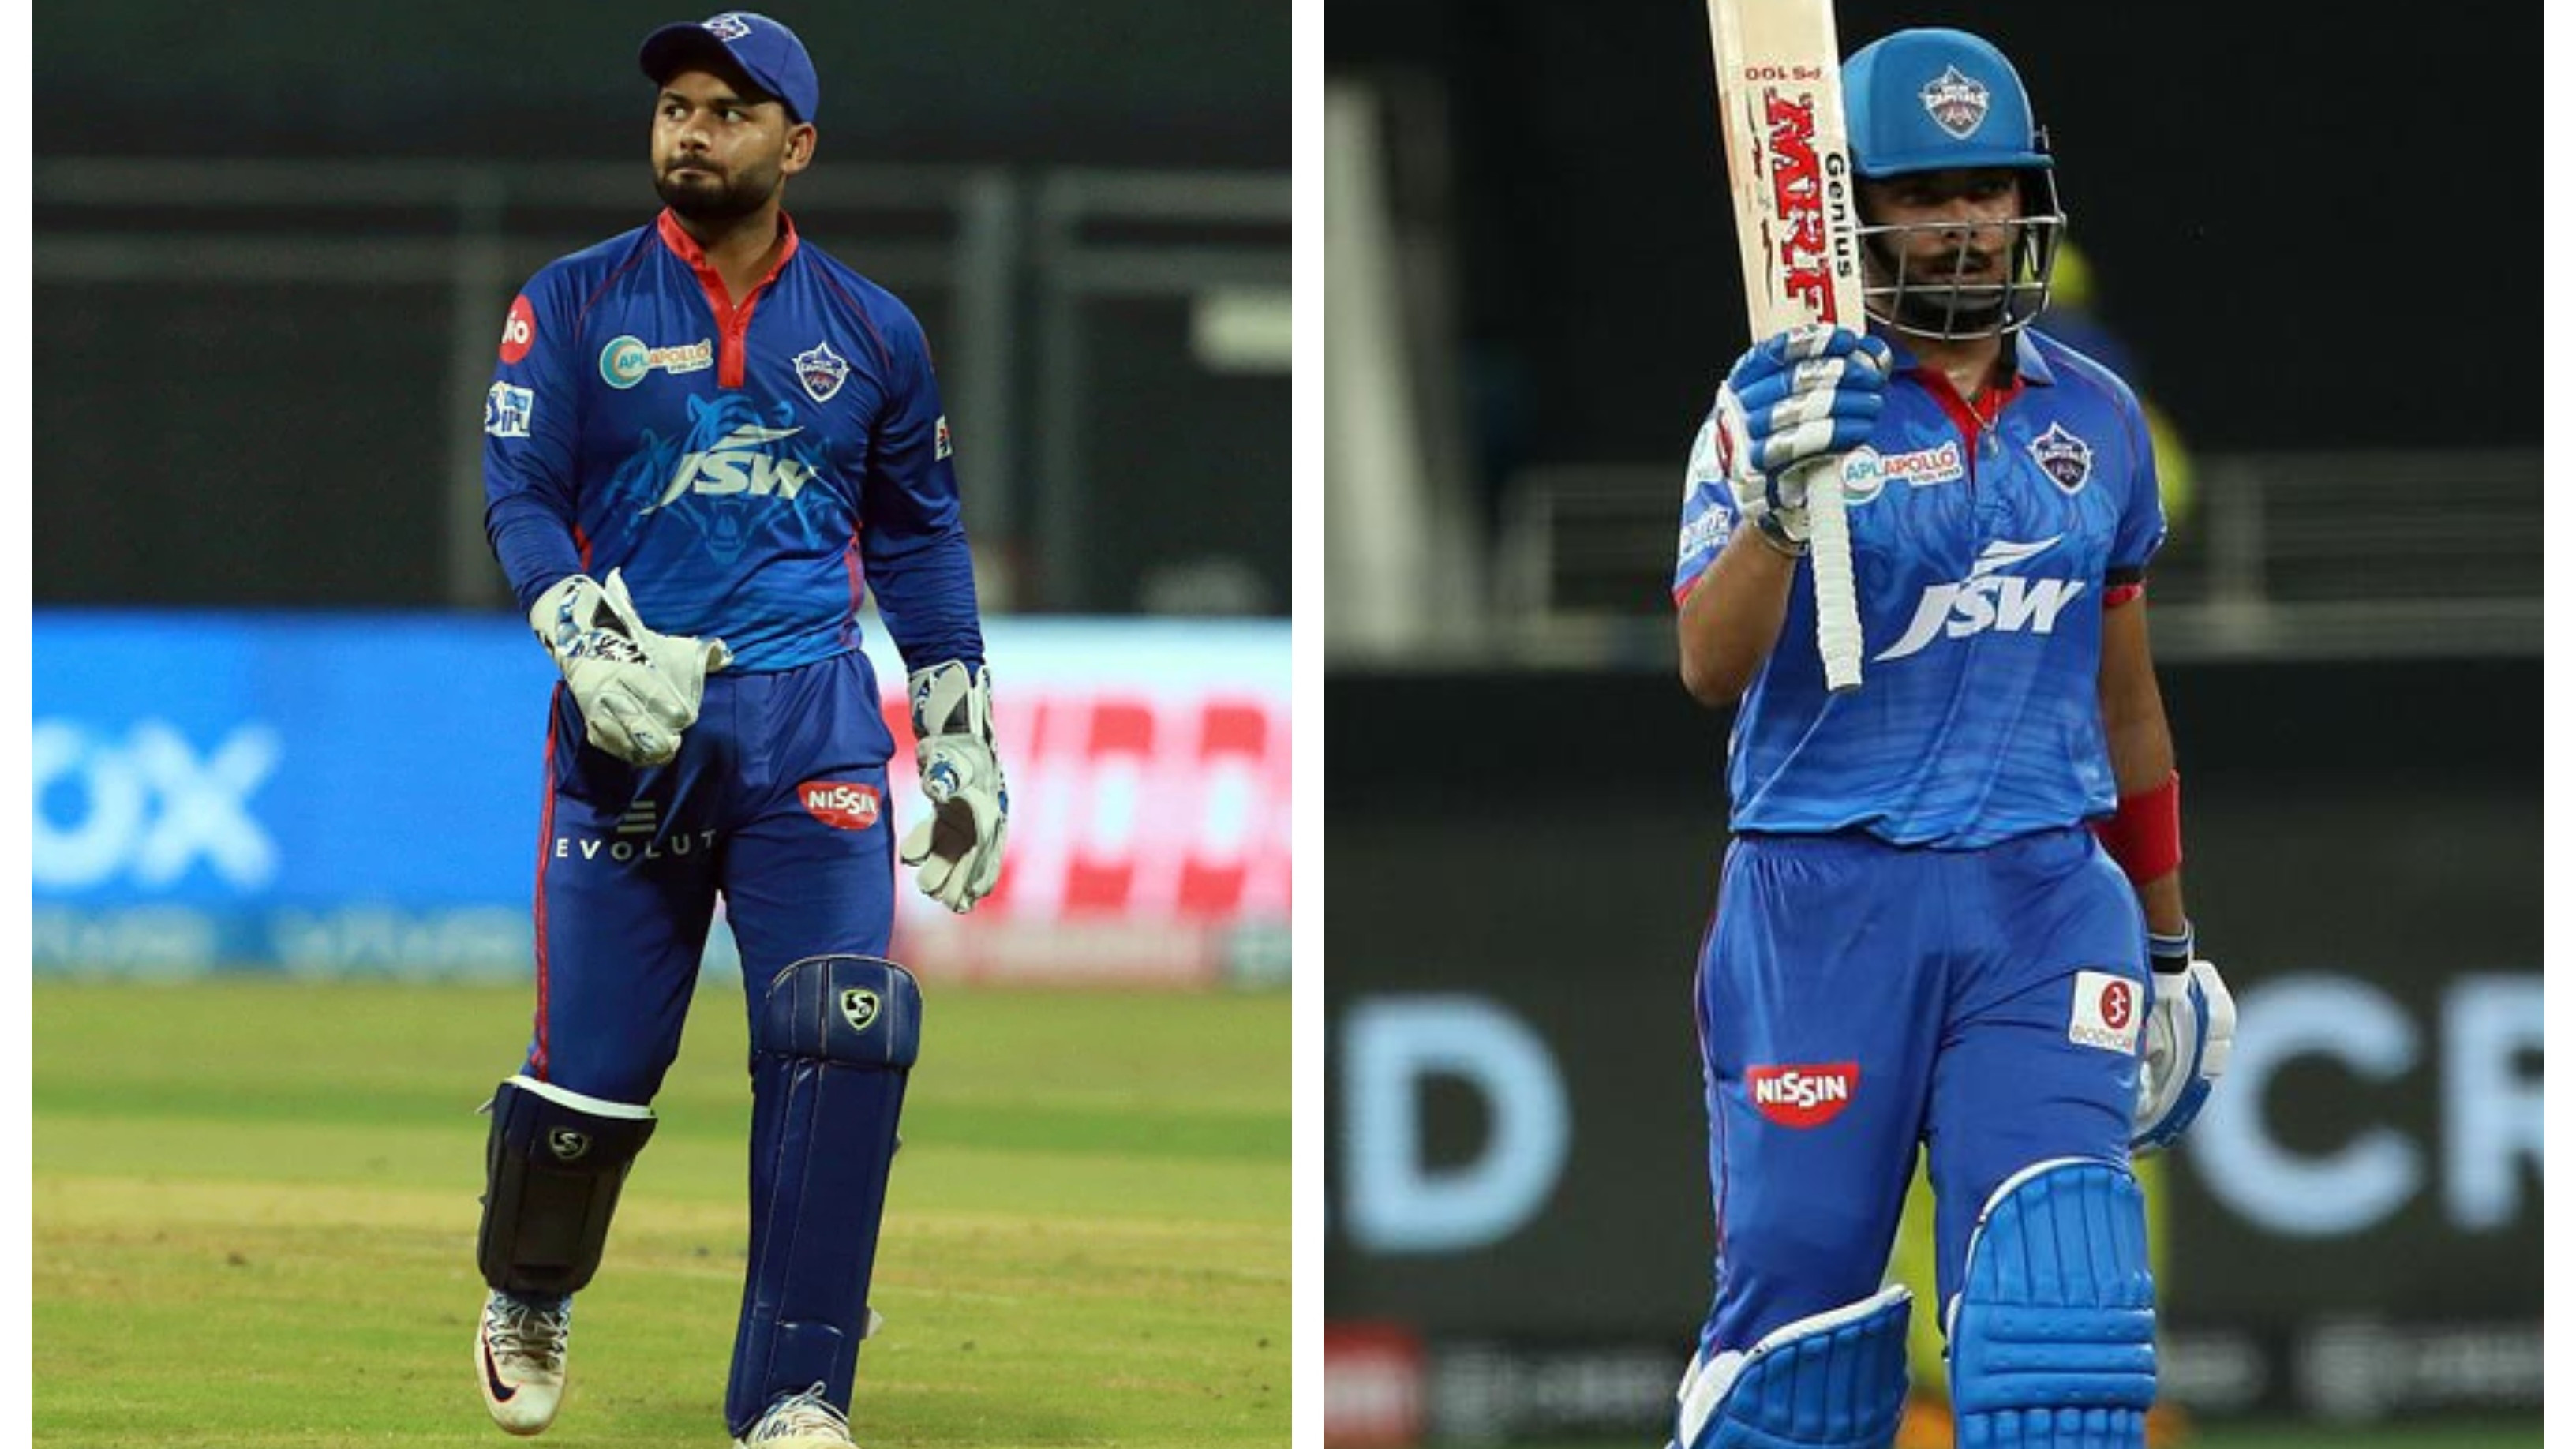 IPL 2022: Rishabh Pant, Prithvi Shaw among four players to be retained by DC, says report